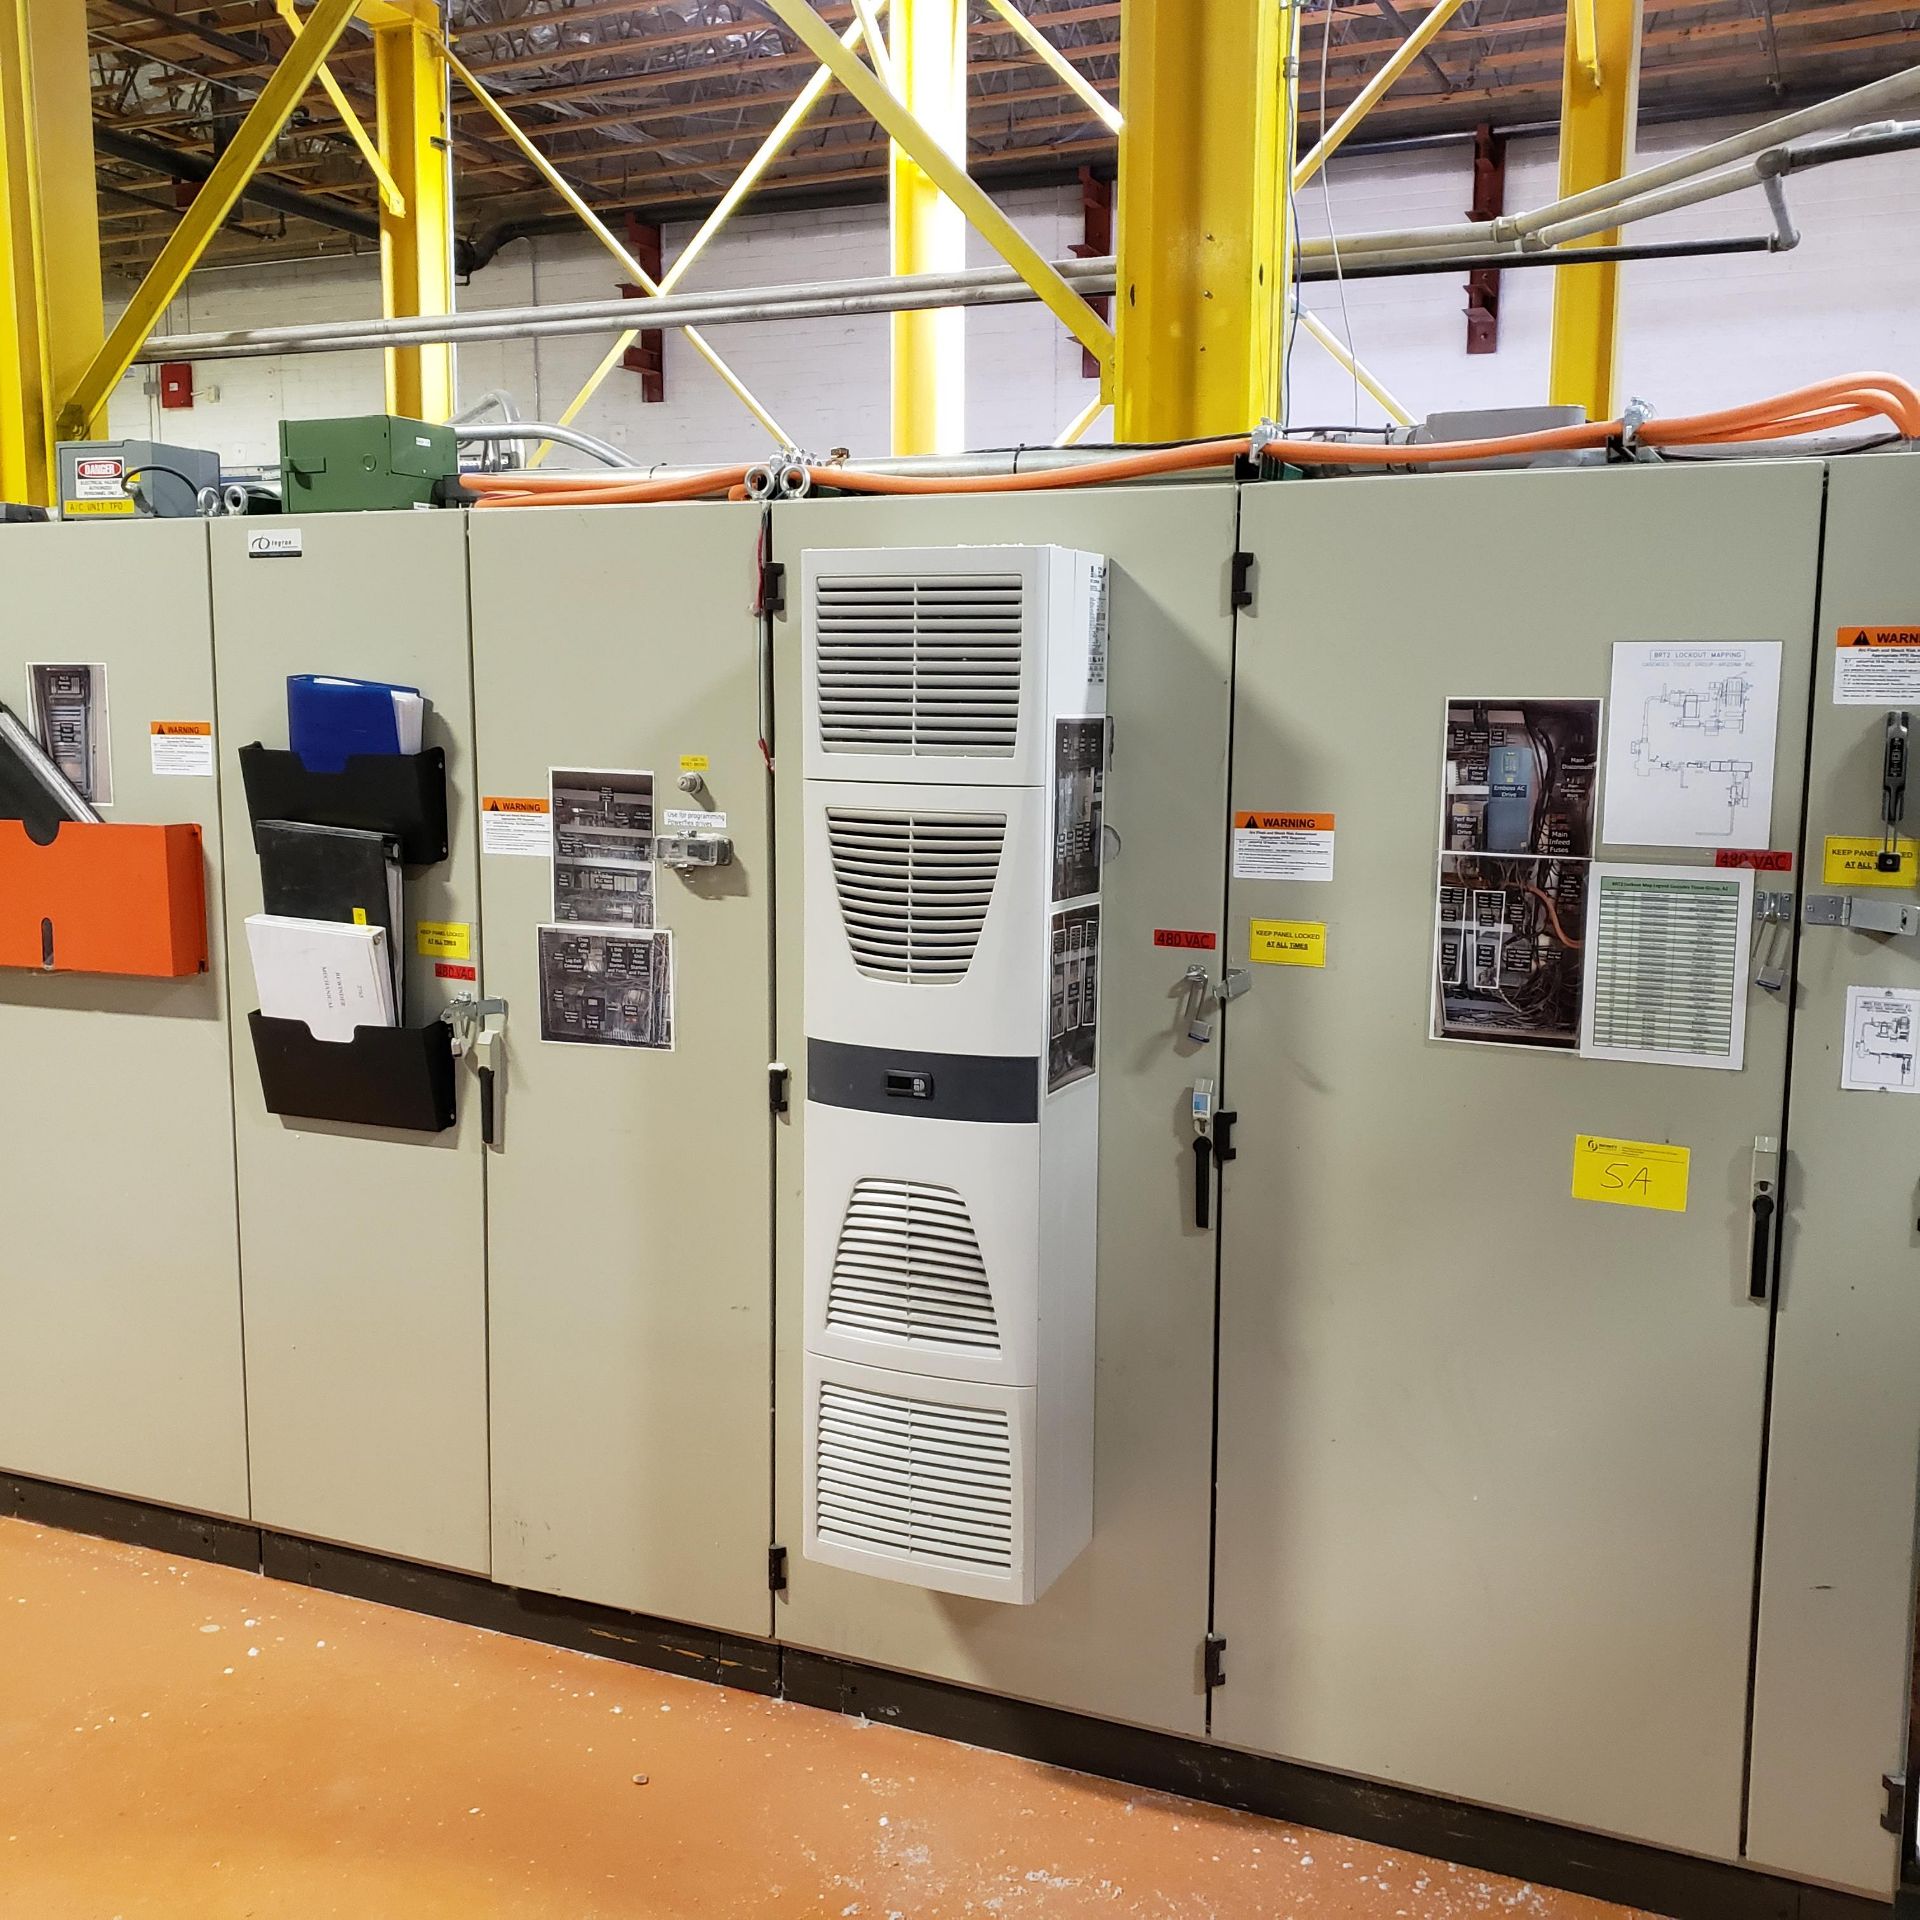 BACKSTANDS DRIVE CABINET, AND MAIN ELECTRICAL CABINET,WITH PLC AND DRIVES (B2 BACKSTAND)